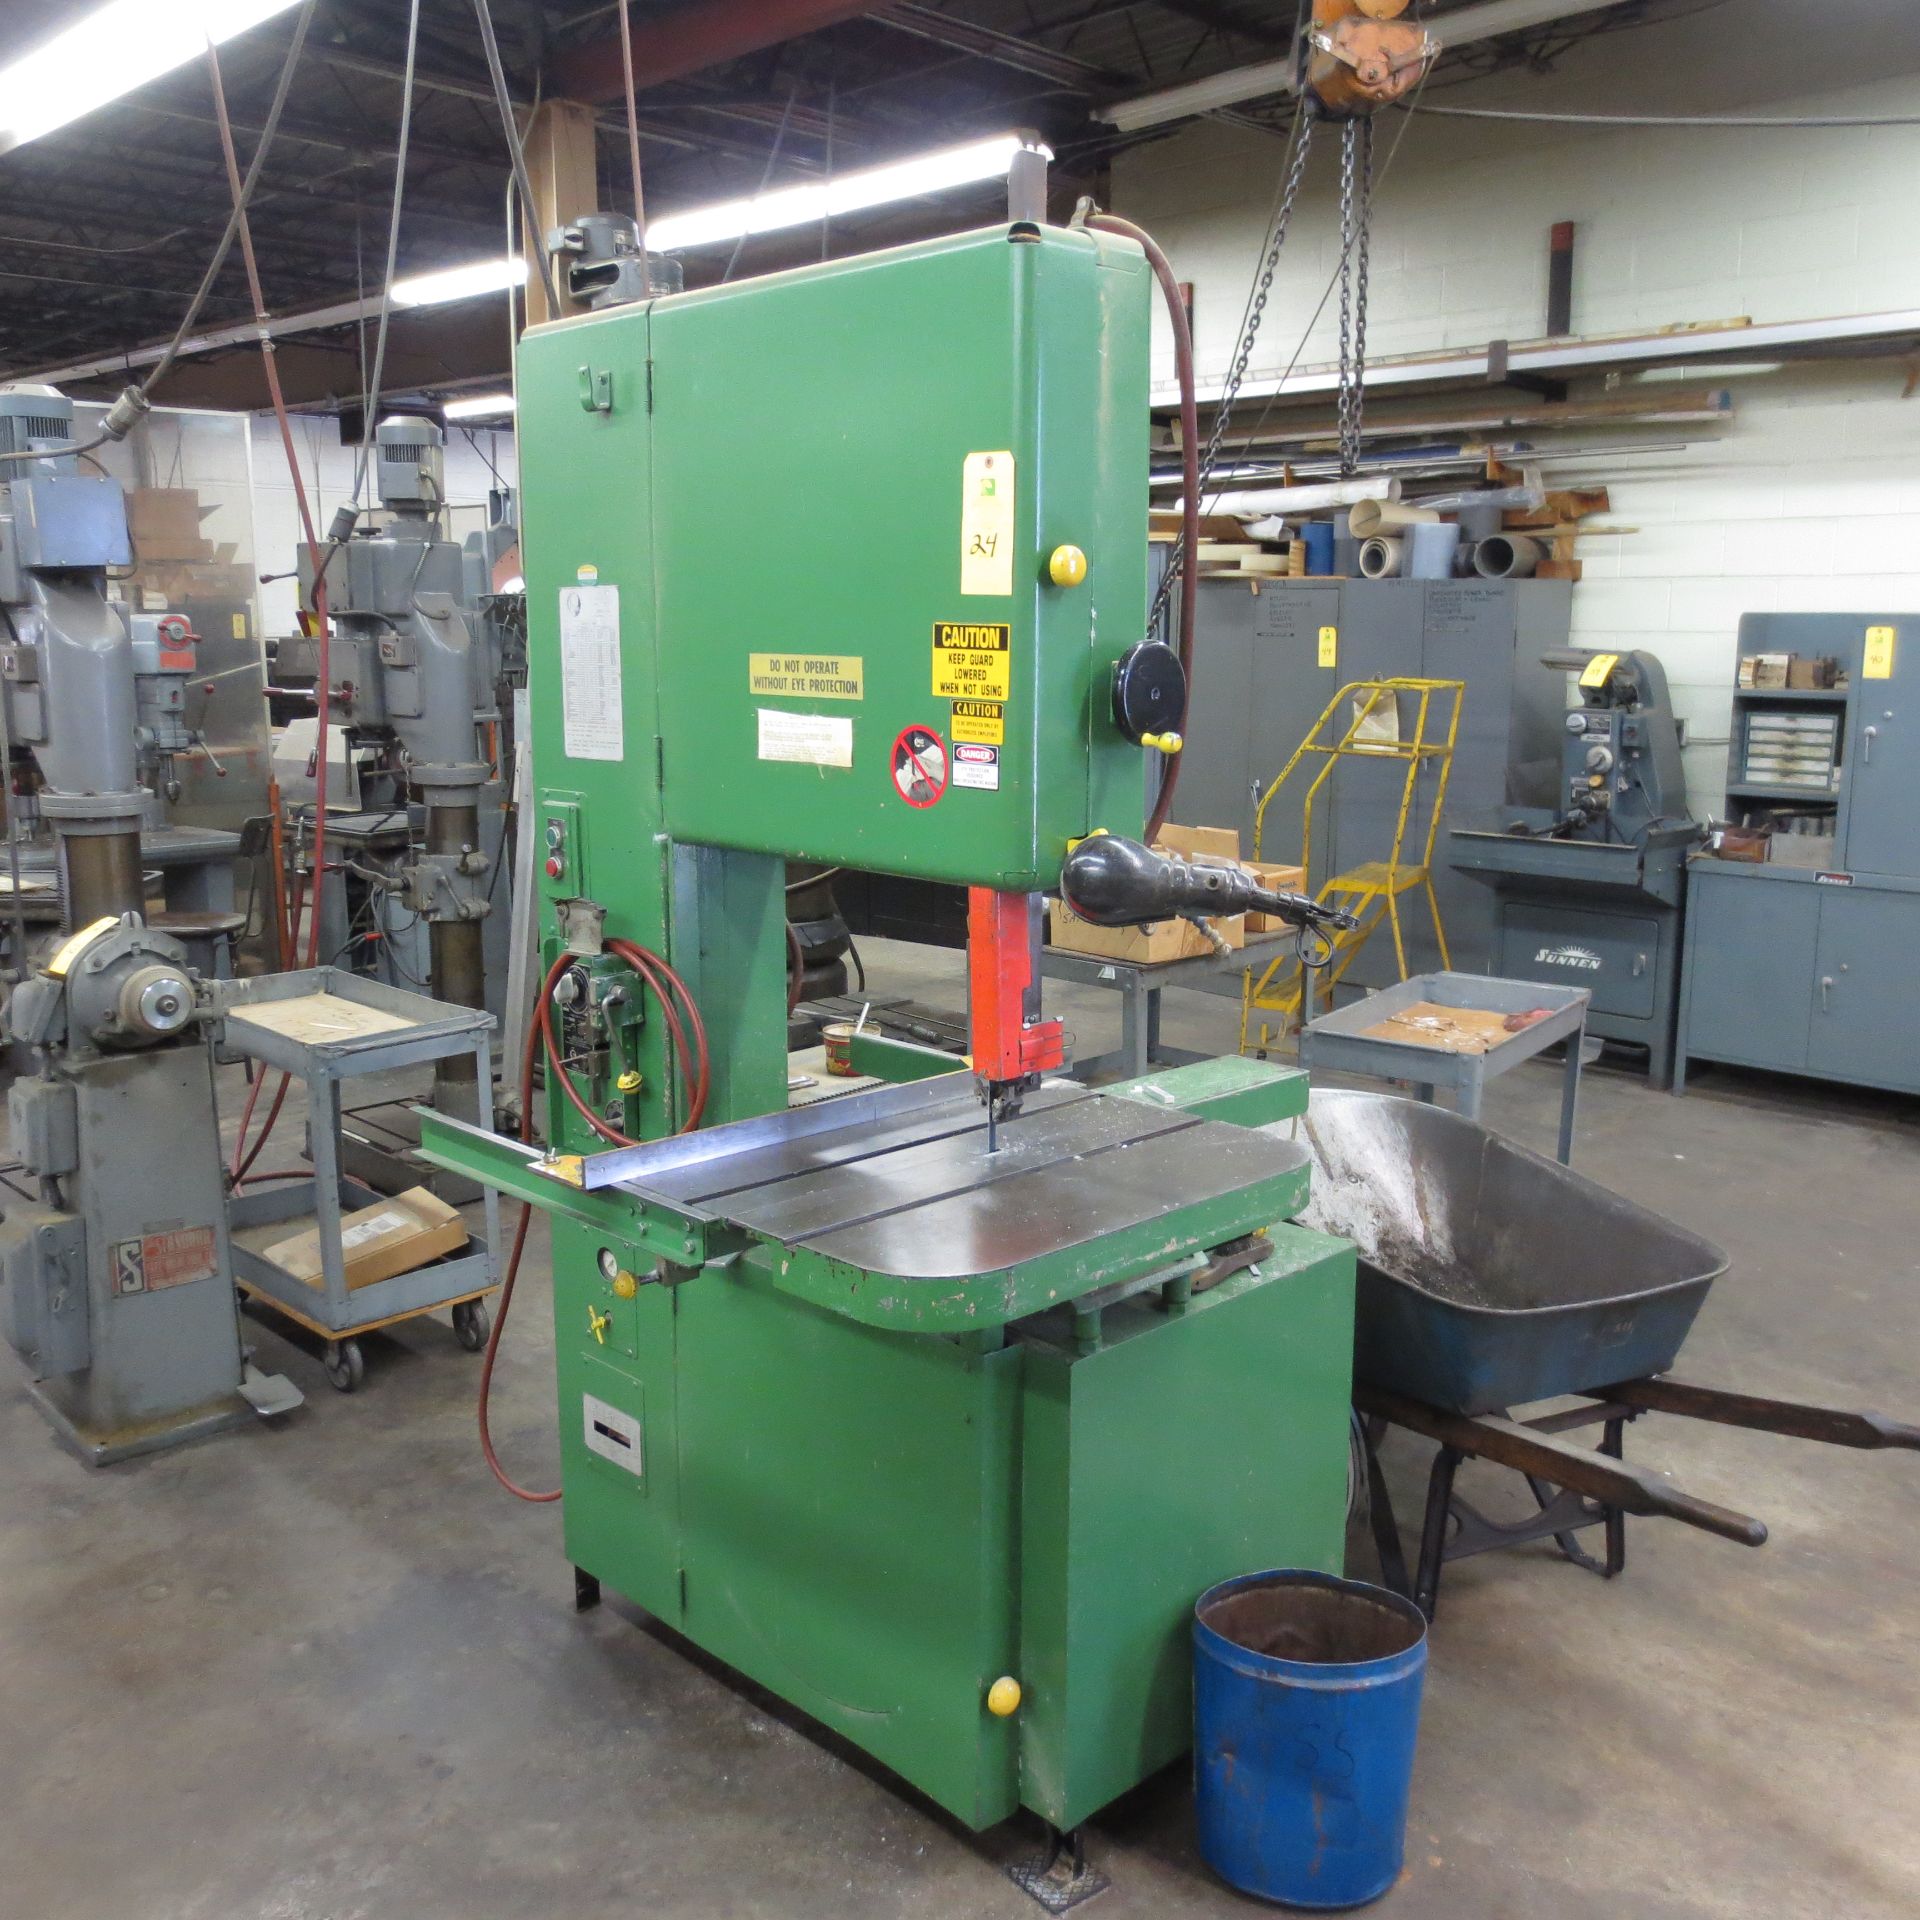 Grob Vertical Band Saw, Type 4V24, 24" Throat with Blade Welder, S/N 580